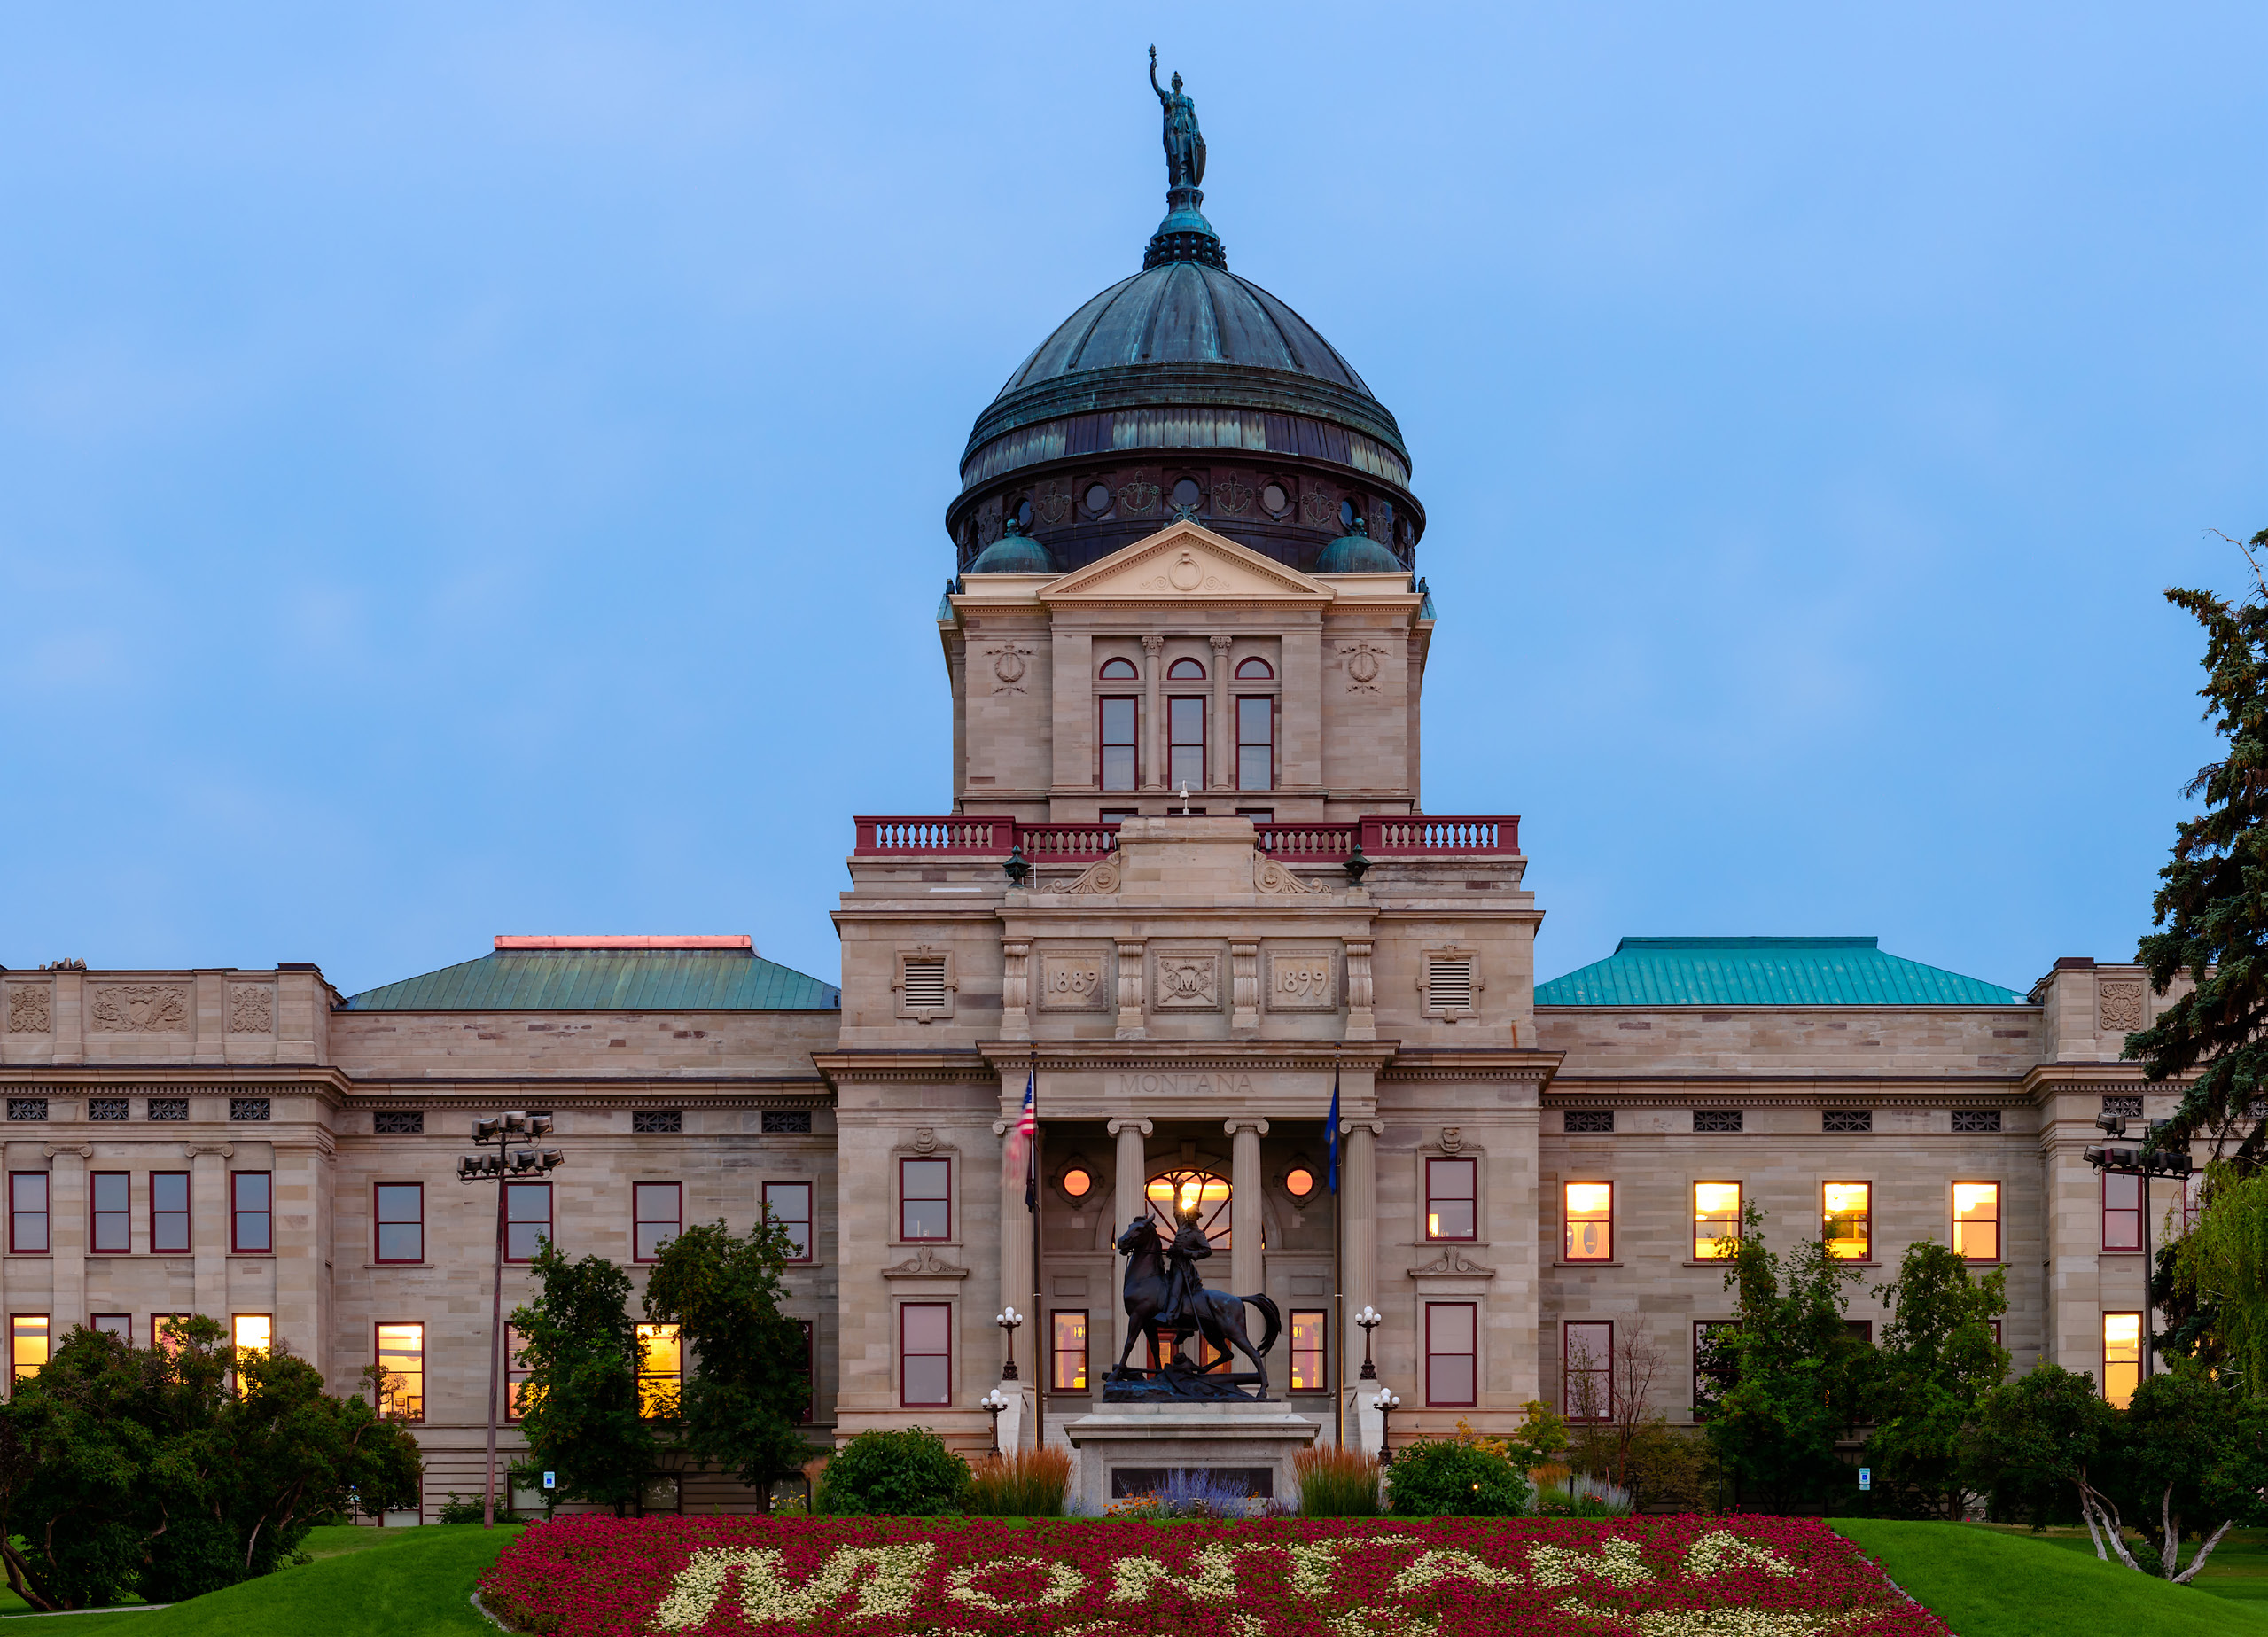 Image of Montana's capitol building at dusk with a light blue sky in the background and windows lit. There is a horse statute in front with a well tended lawn. The building rises tall with a small statue of a human at the very top.